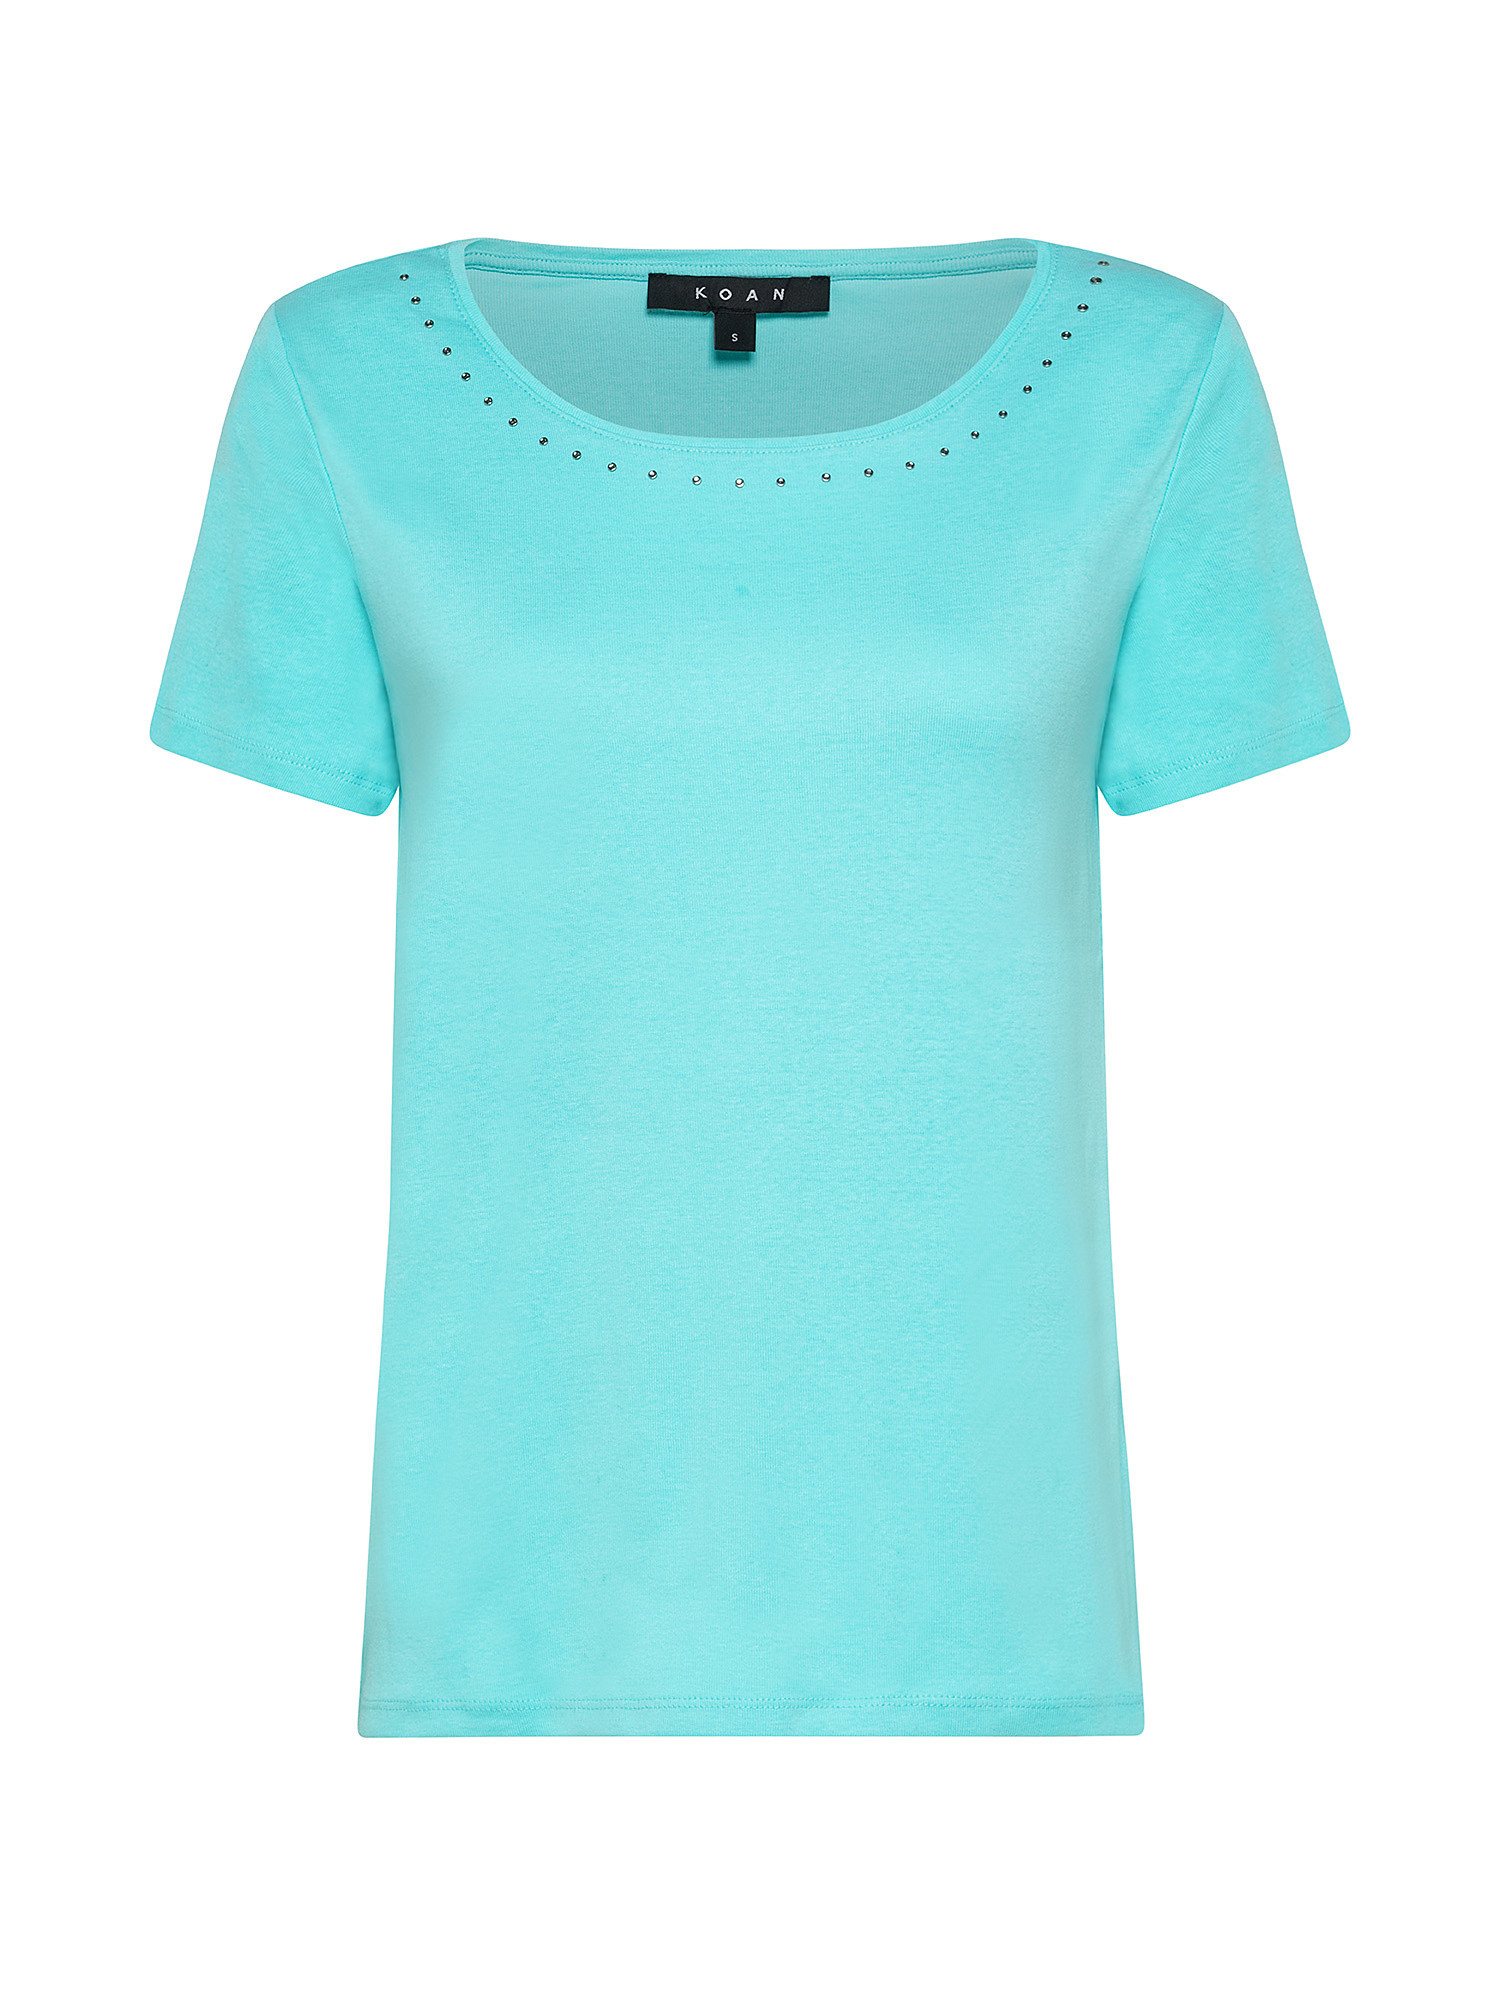 T-shirt con strass, Azzurro, large image number 0